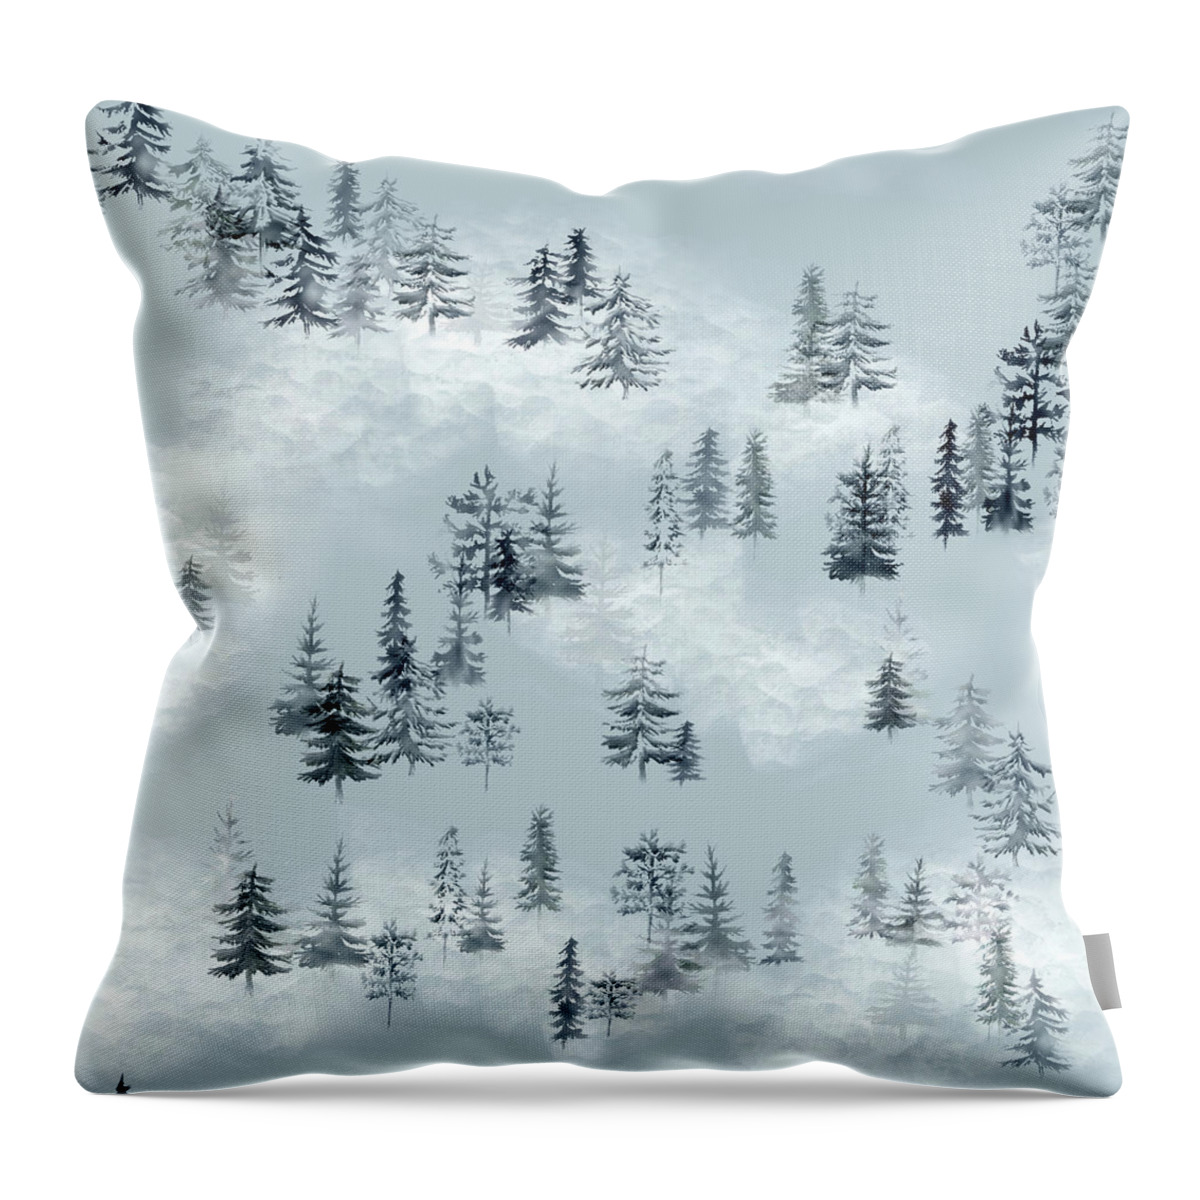 Seamless Repeat Throw Pillow featuring the digital art Pine Cloud Forest Pattern by Sand And Chi